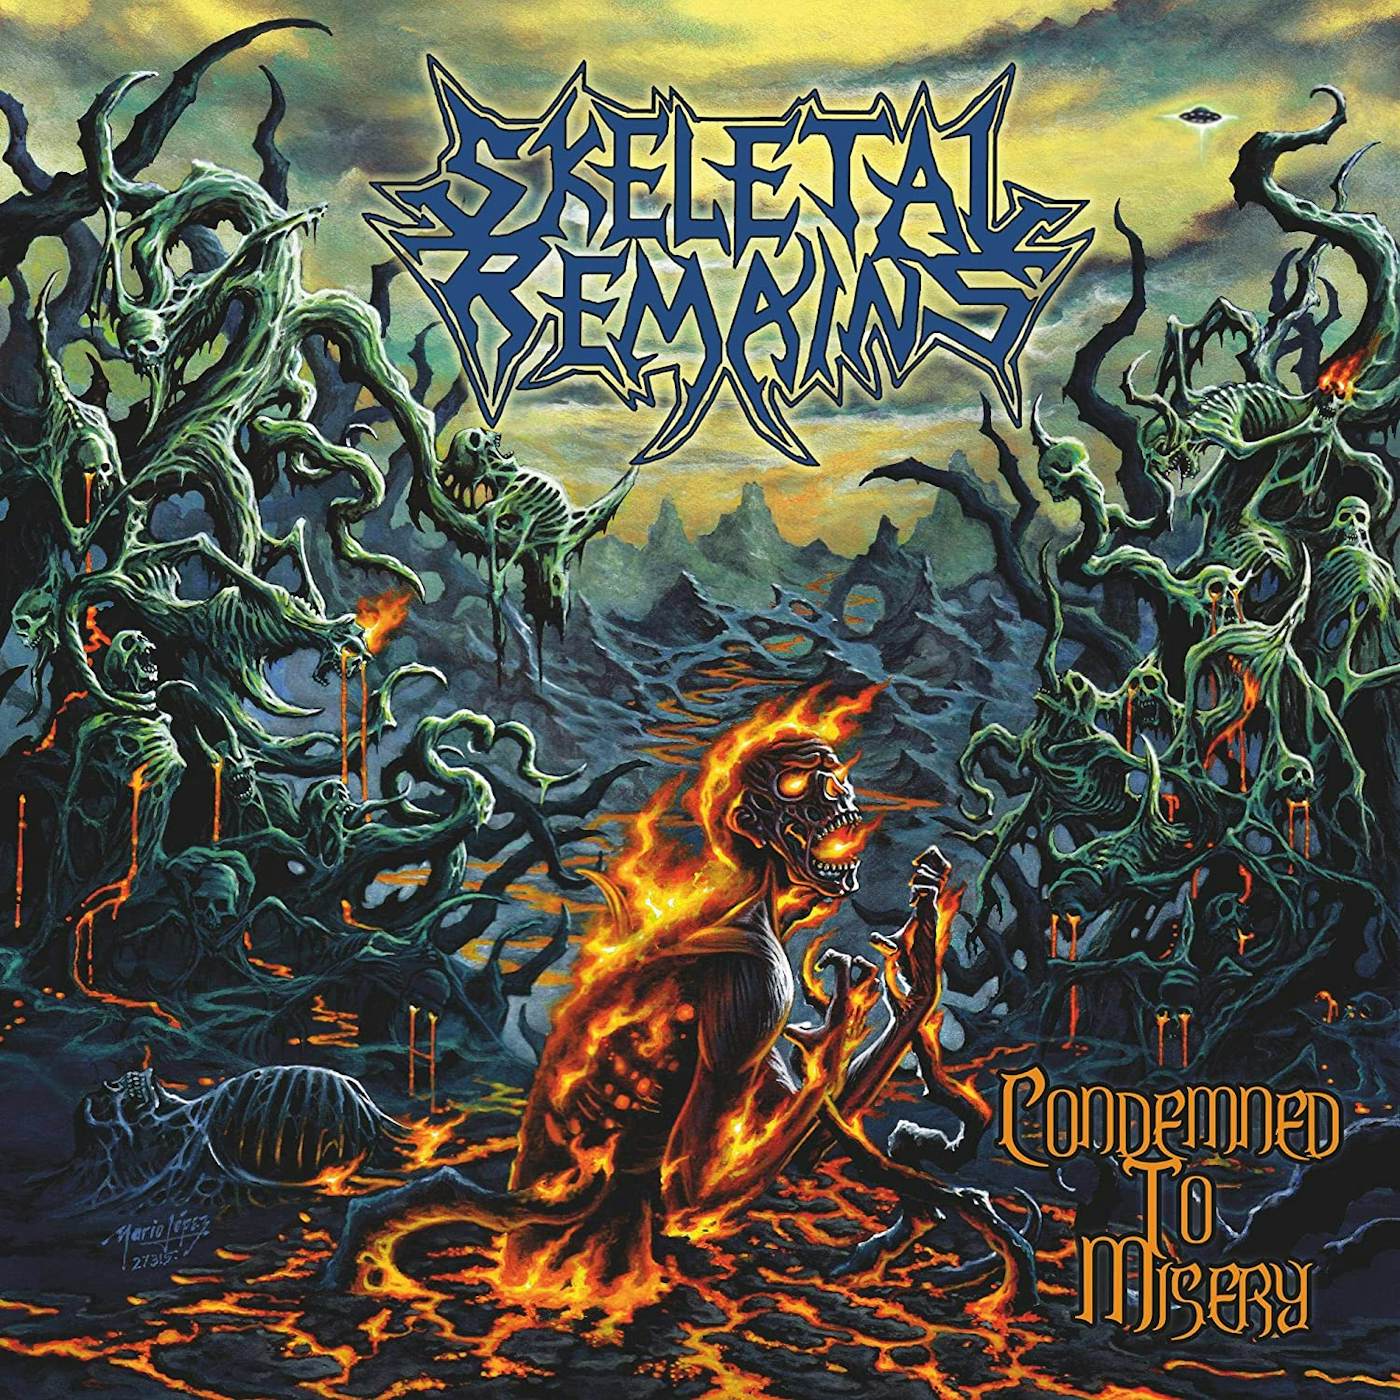 Skeletal Remains CONDEMNED TO MISERY (180G/REISSUE) Vinyl Record